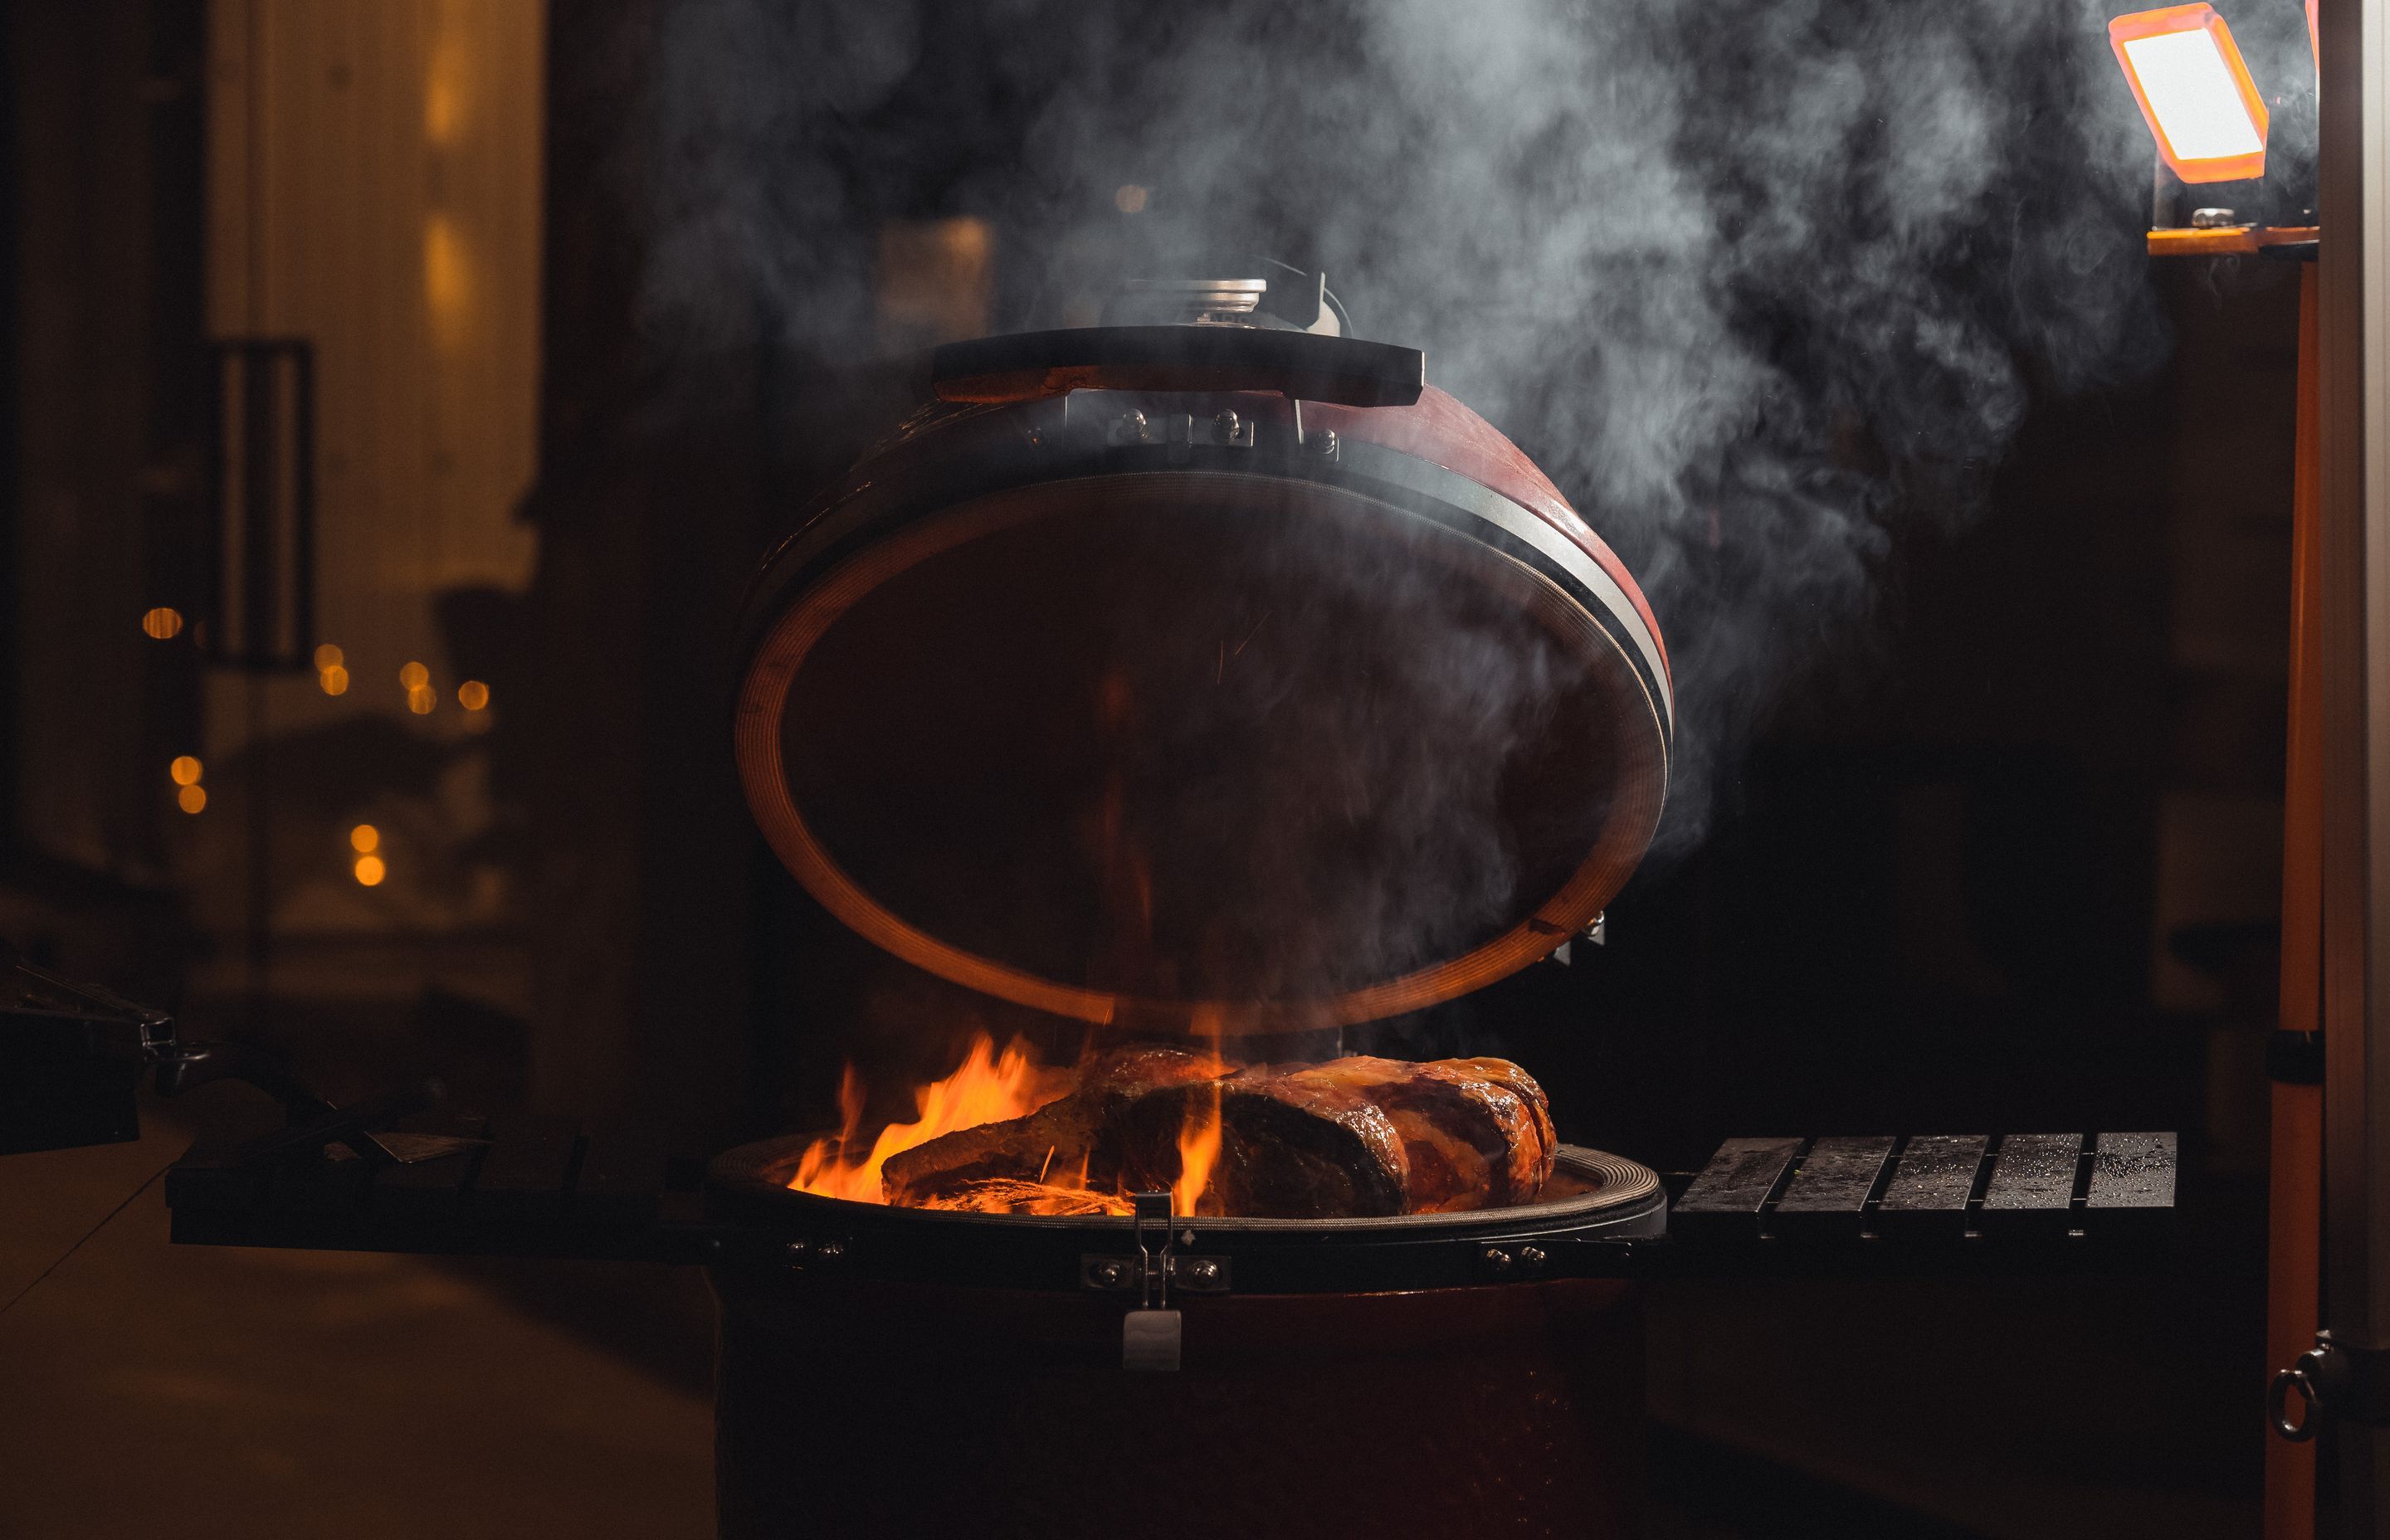 The Kamado Joe is a great choice for anyone interested in exploring cooking with fire.